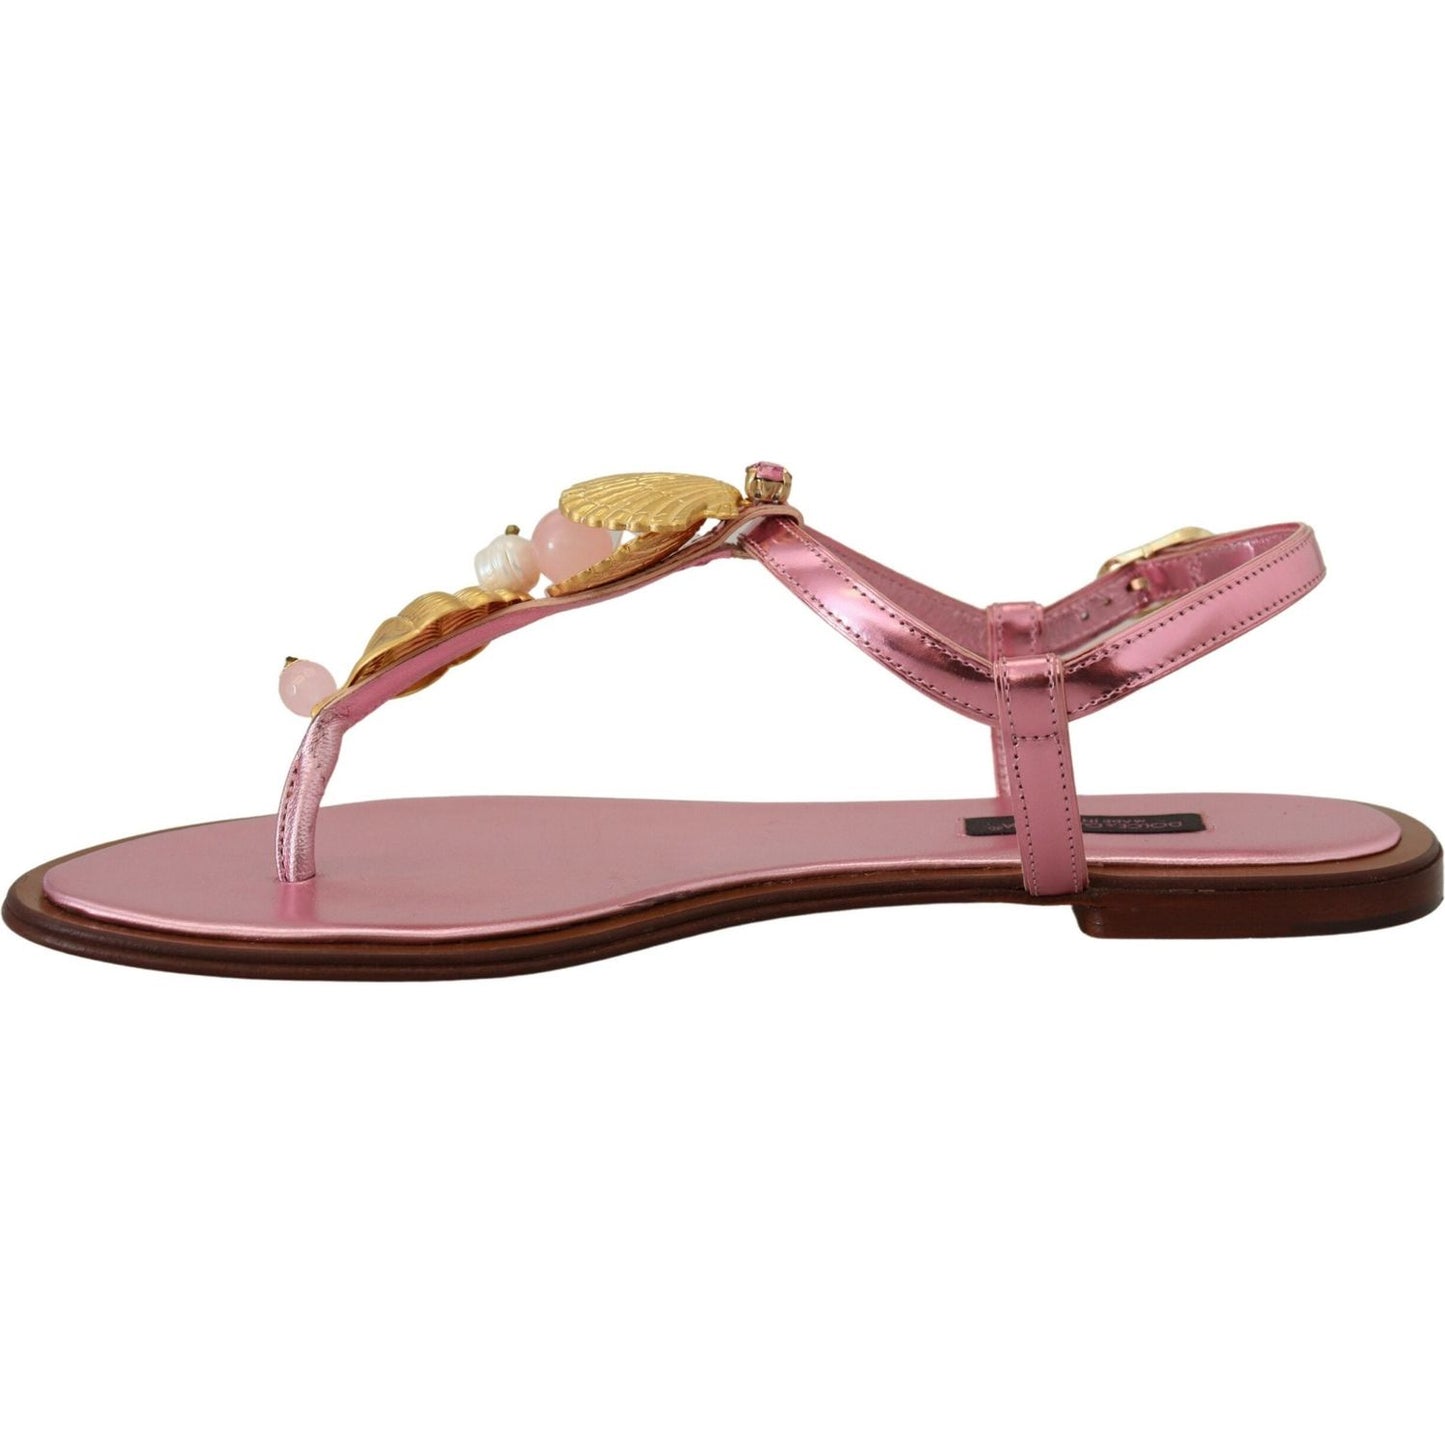 Dolce & Gabbana Chic Pink Leather Sandals with Exquisite Embellishment pink-embellished-slides-flats-sandals-shoes